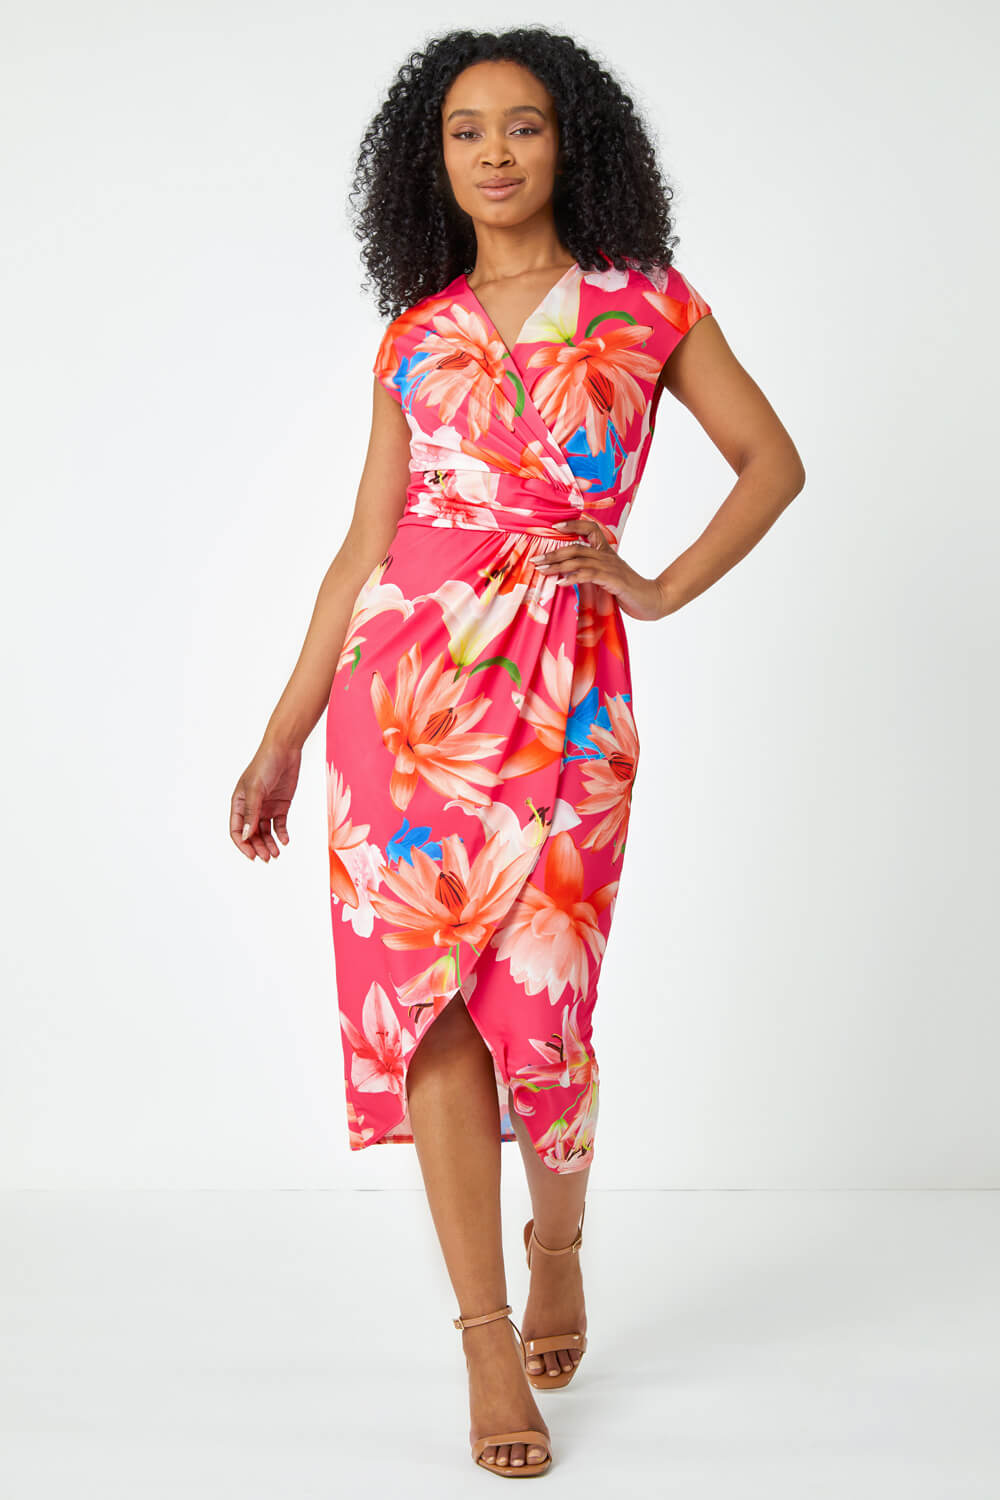 CORAL Petite Ruched Floral Wrap Dress, Image 2 of 5